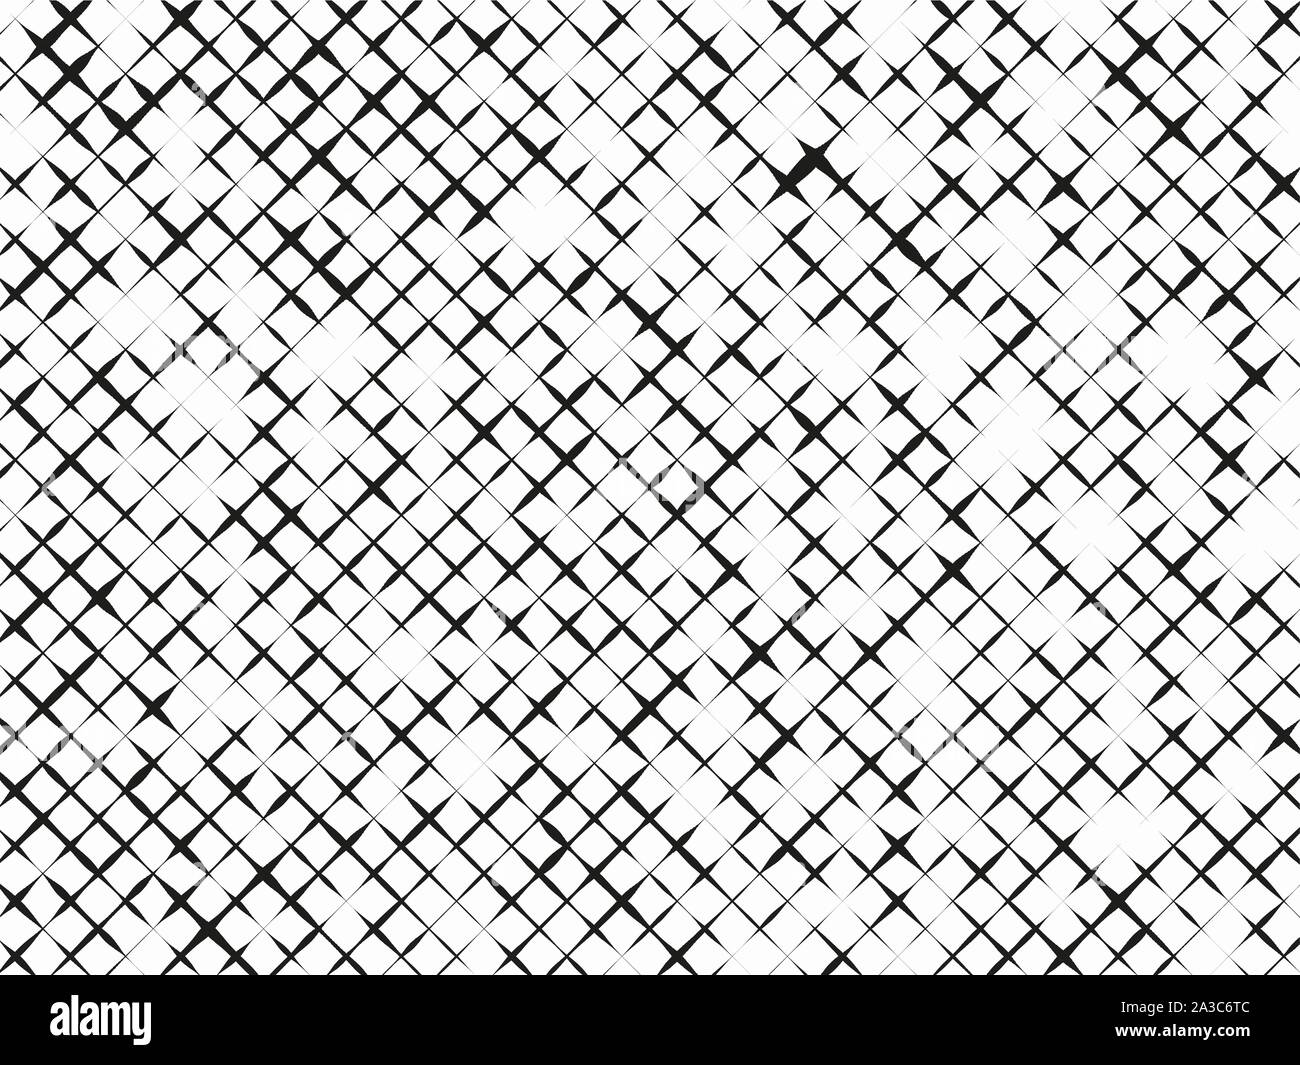 Abstract geometric pattern with diagonal overlapping stripes and crossing lines in black and white. Pop art geometric background. Simple monochrome texture. Stock Vector